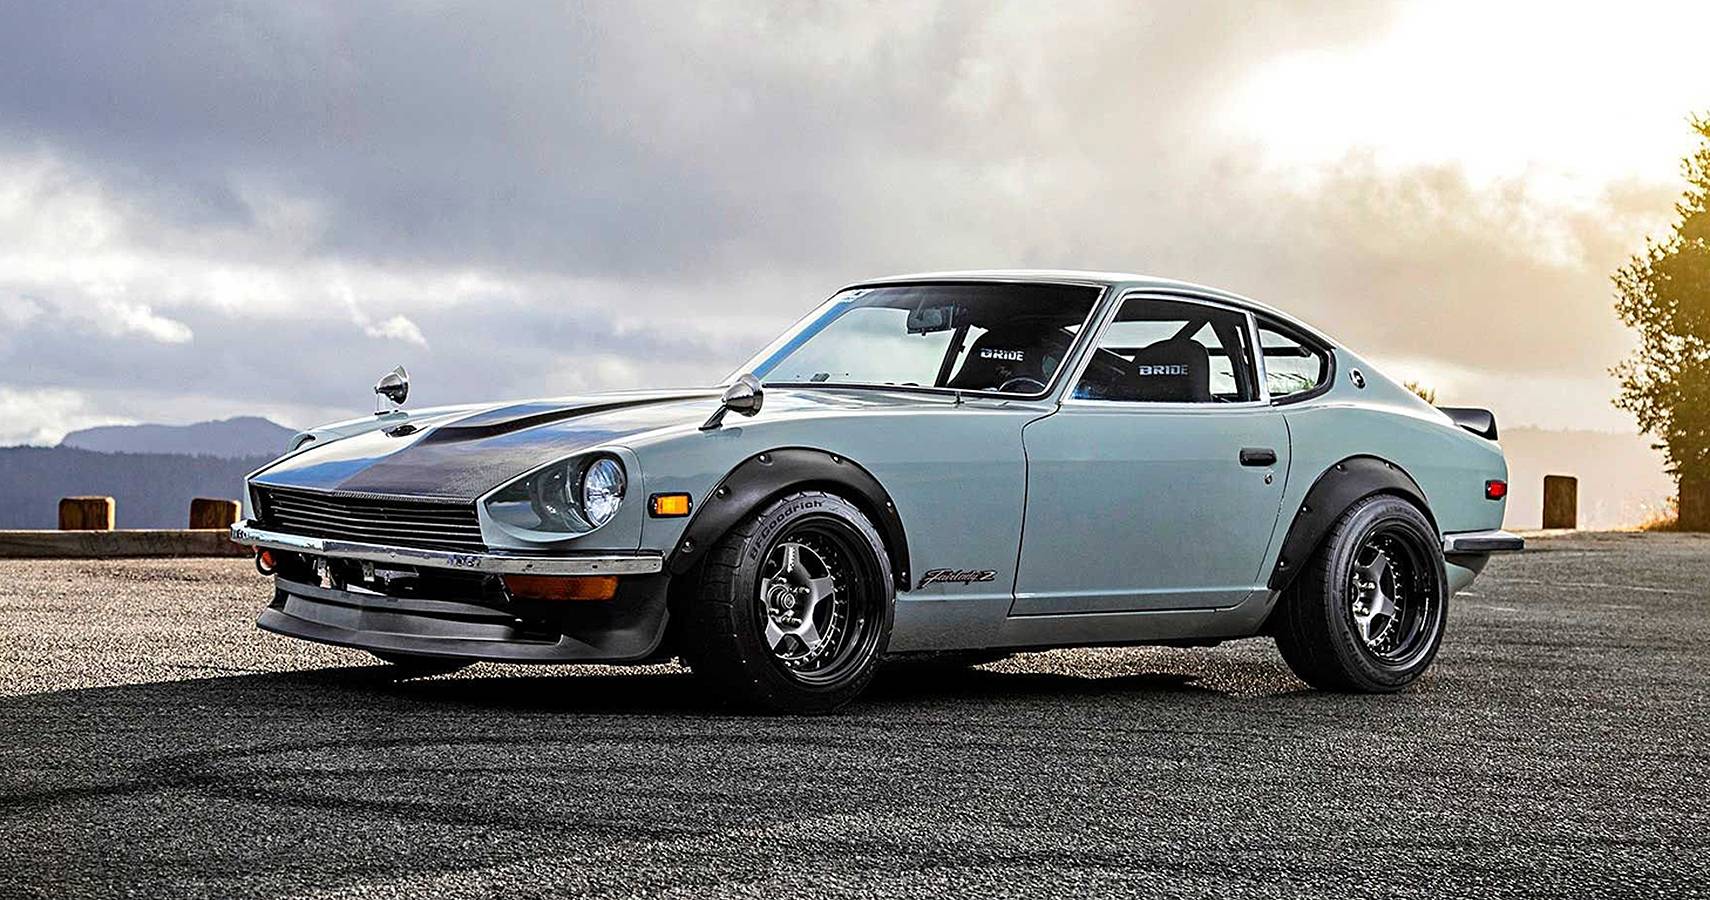 15 Stunning Modified Nissan Z Sports Cars You Need To See